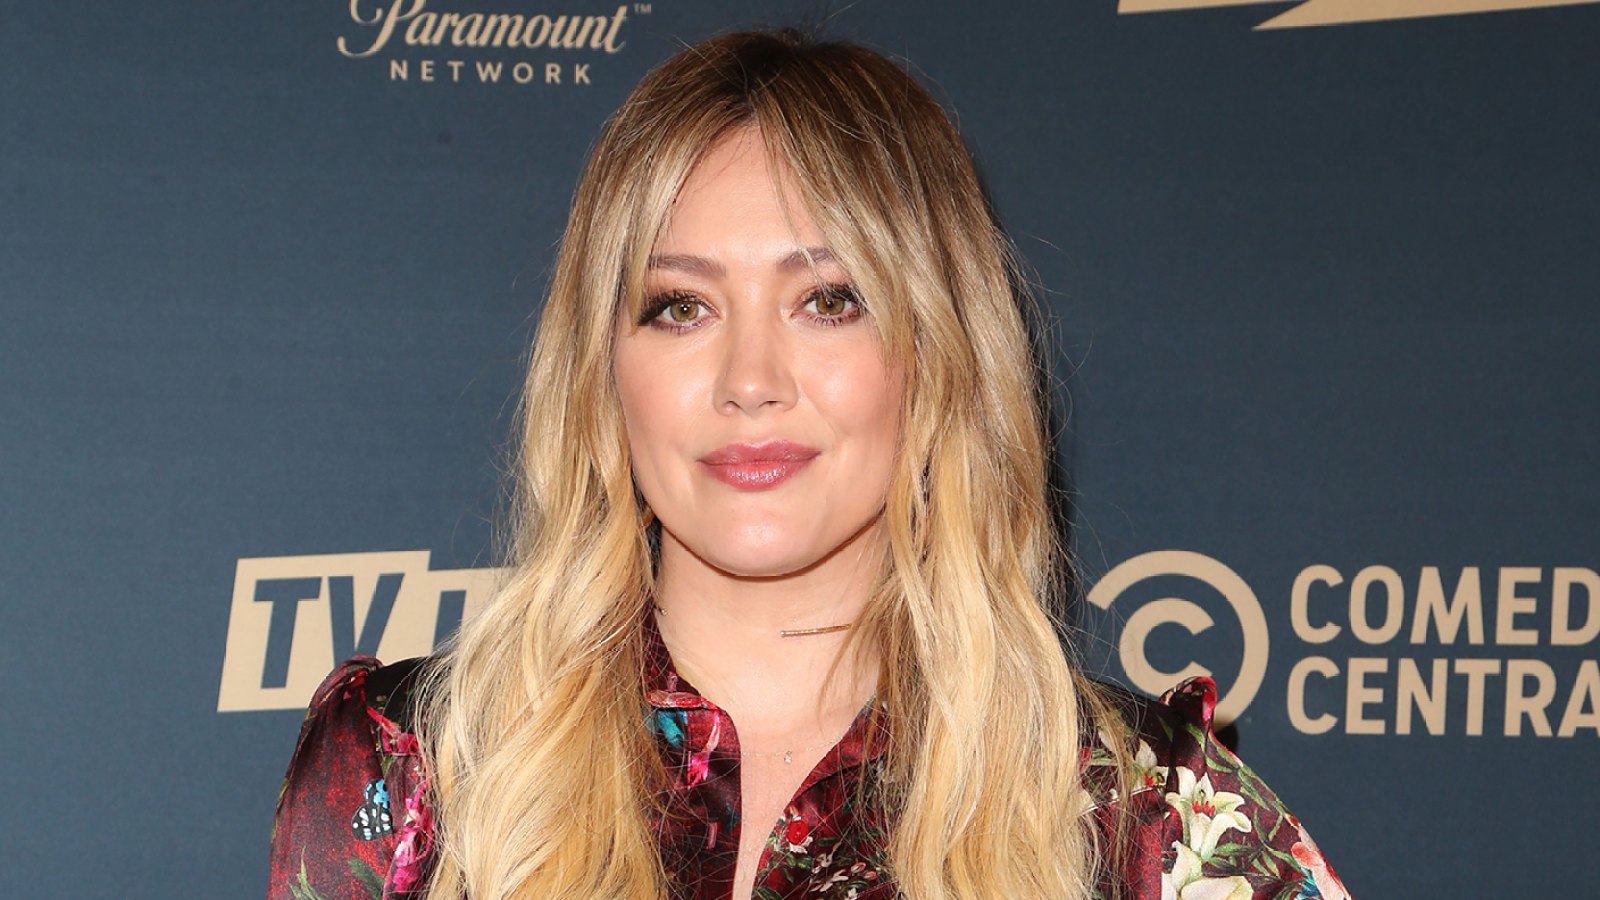 Hilary Duff 2020 Wallpapers